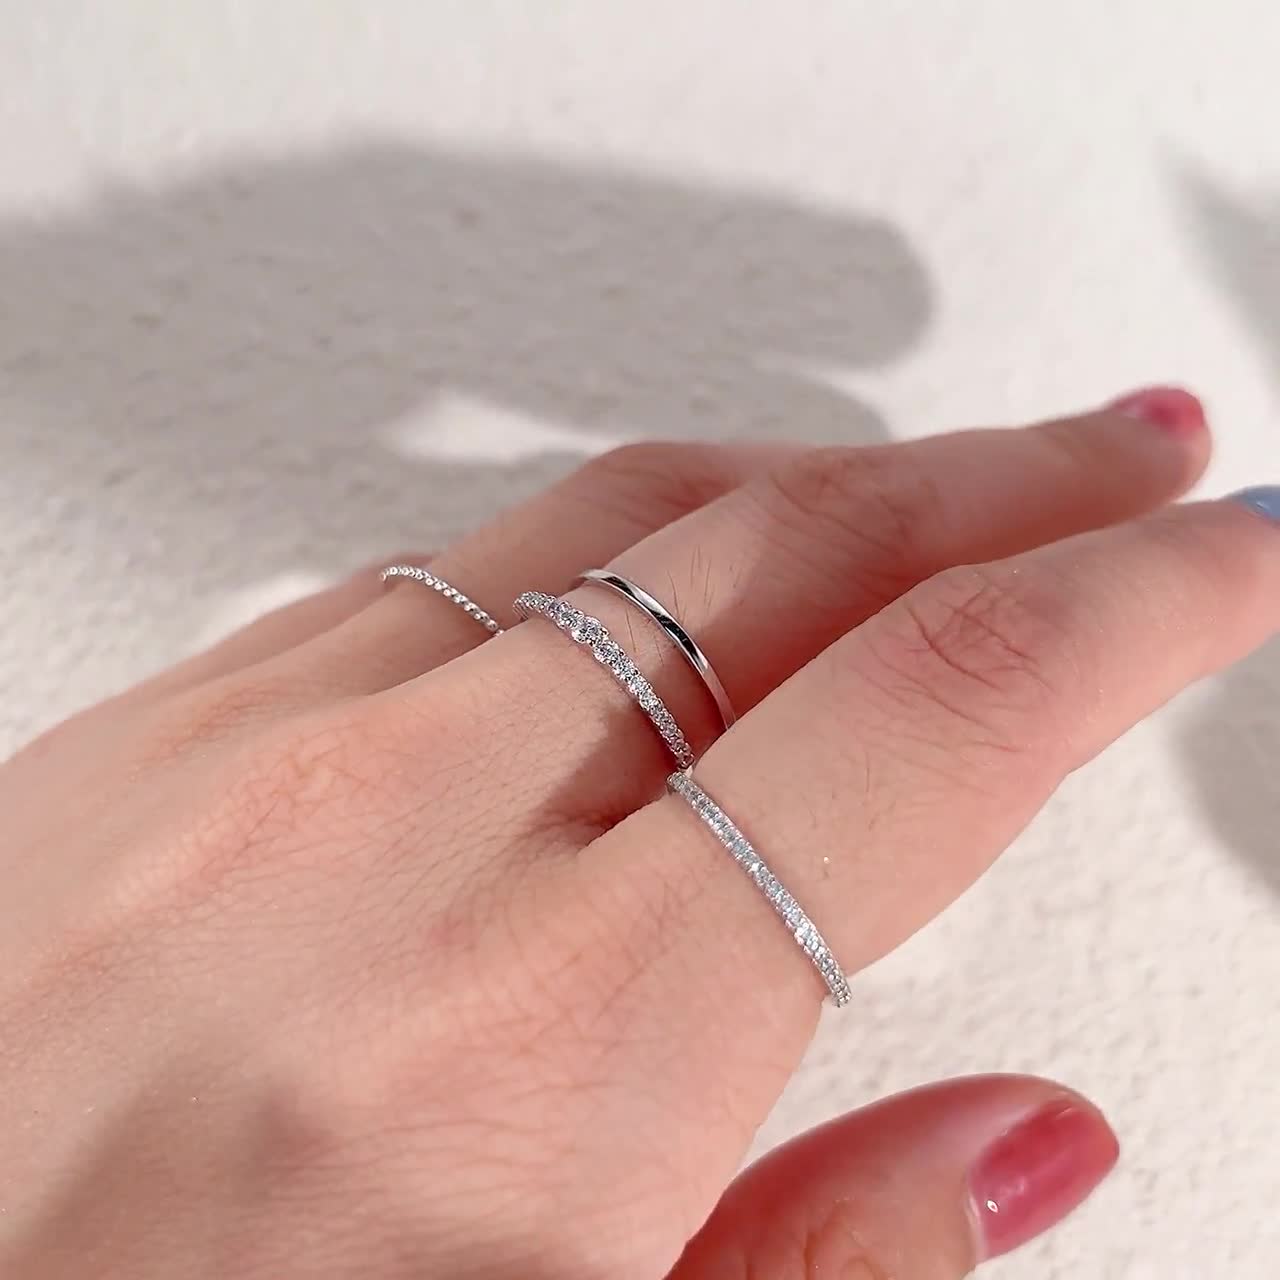 Stackable Ring Set Sterling Gold Dainty Stacking Simple Diamond Thin Silver Etsy of Delicate Ultra of 4, Mixed 925 Ring Rings Thin Set Minimalist 